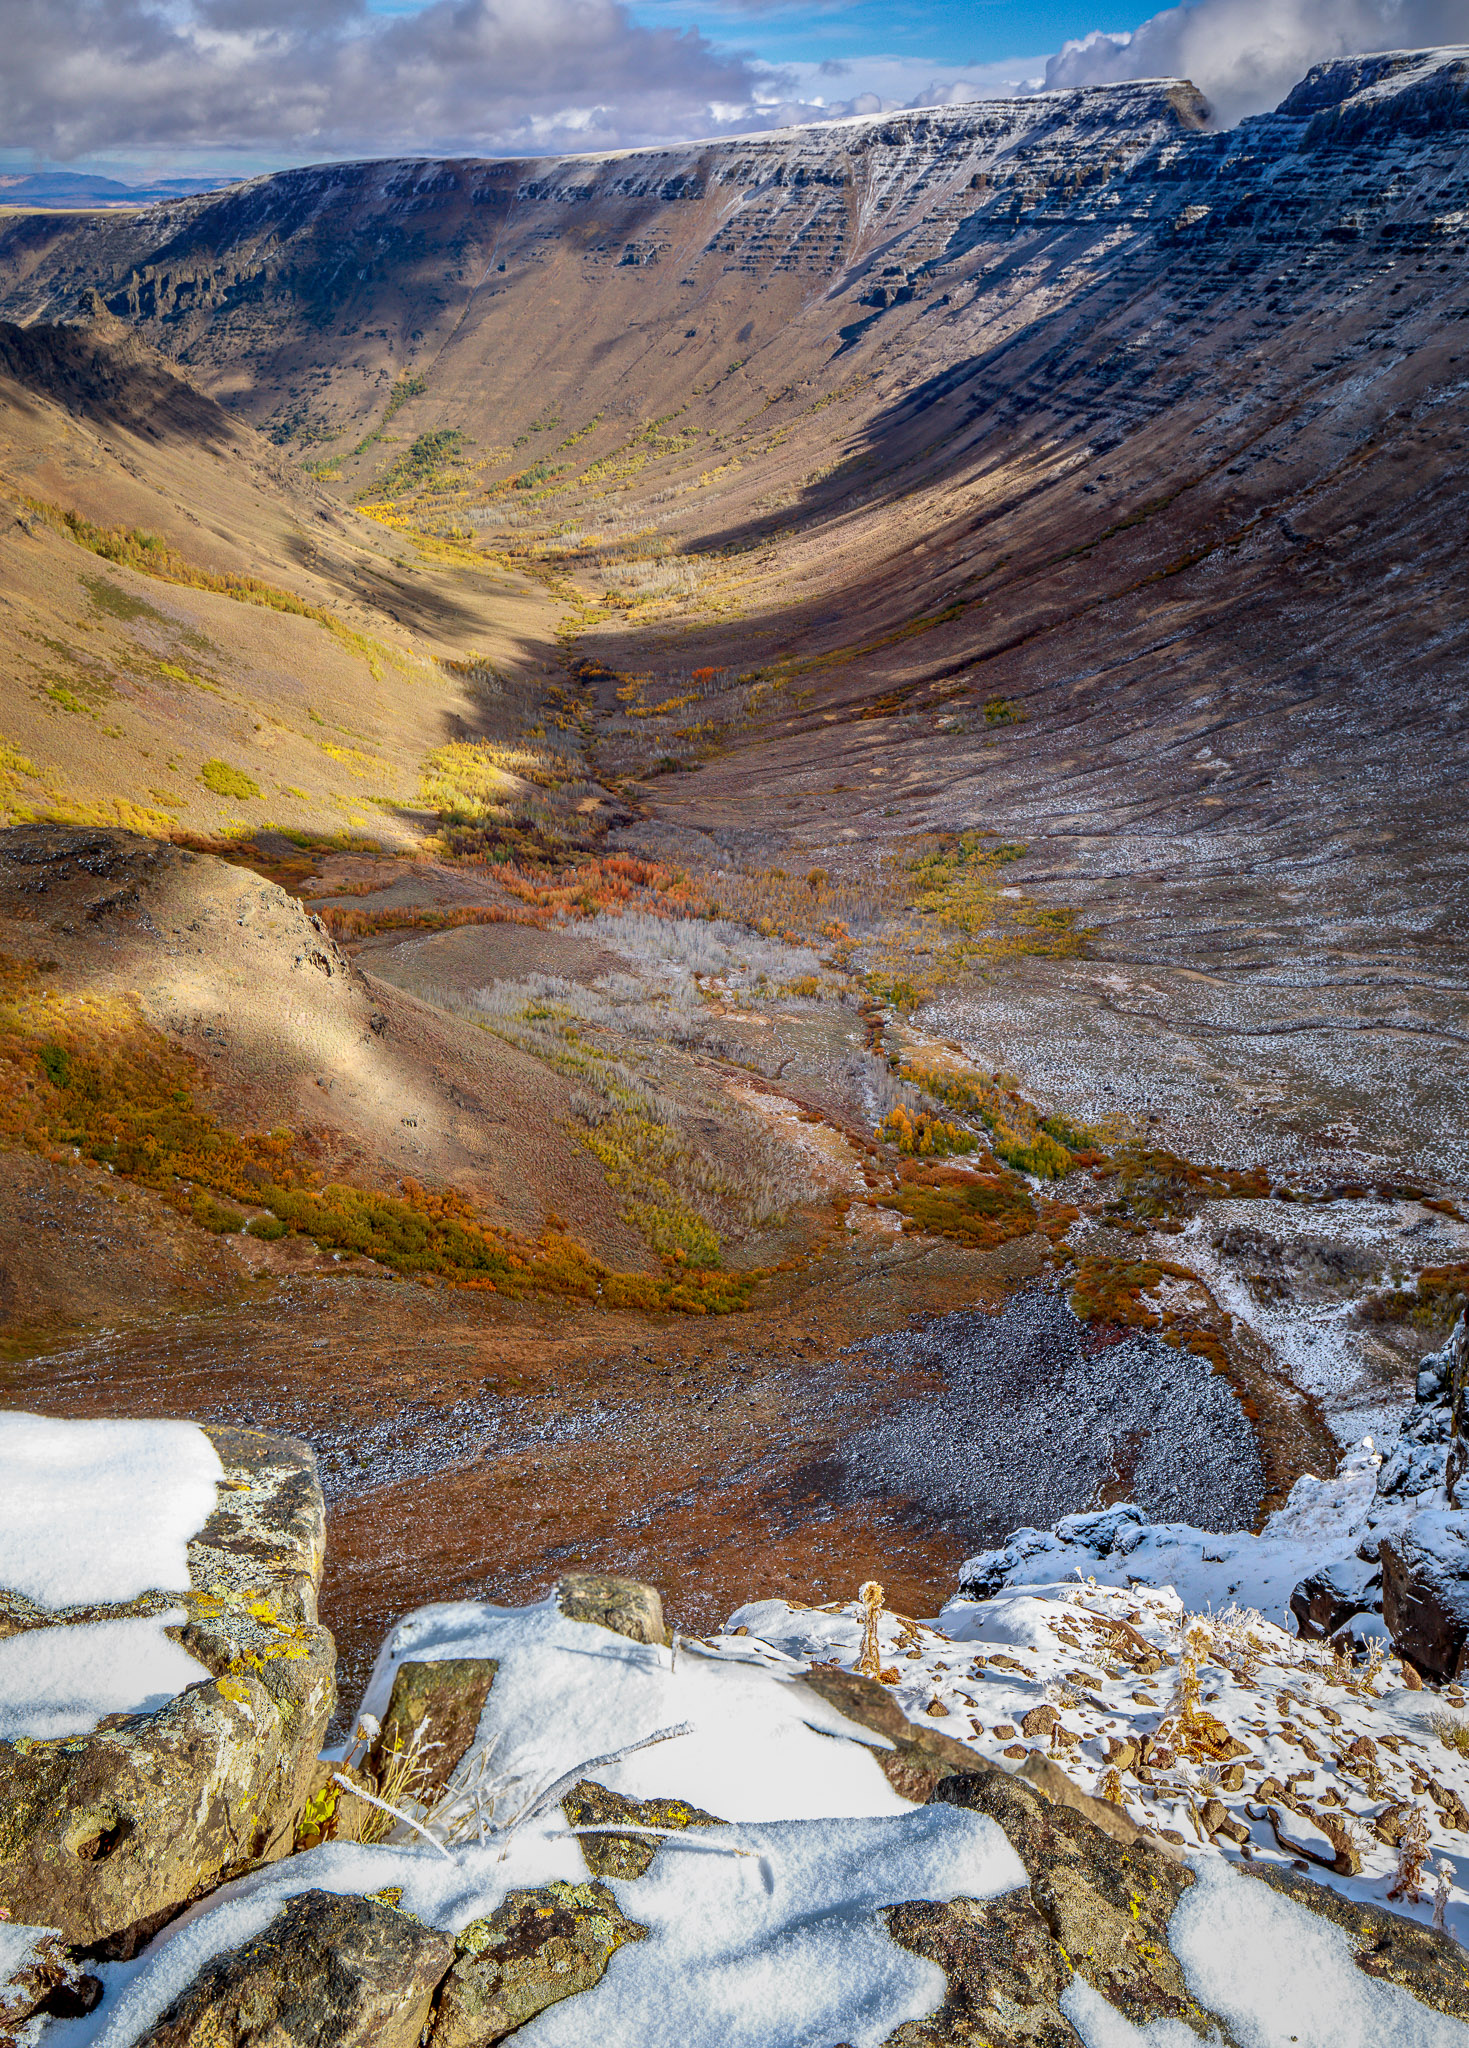 Steens Mountain's Kiger Gorge